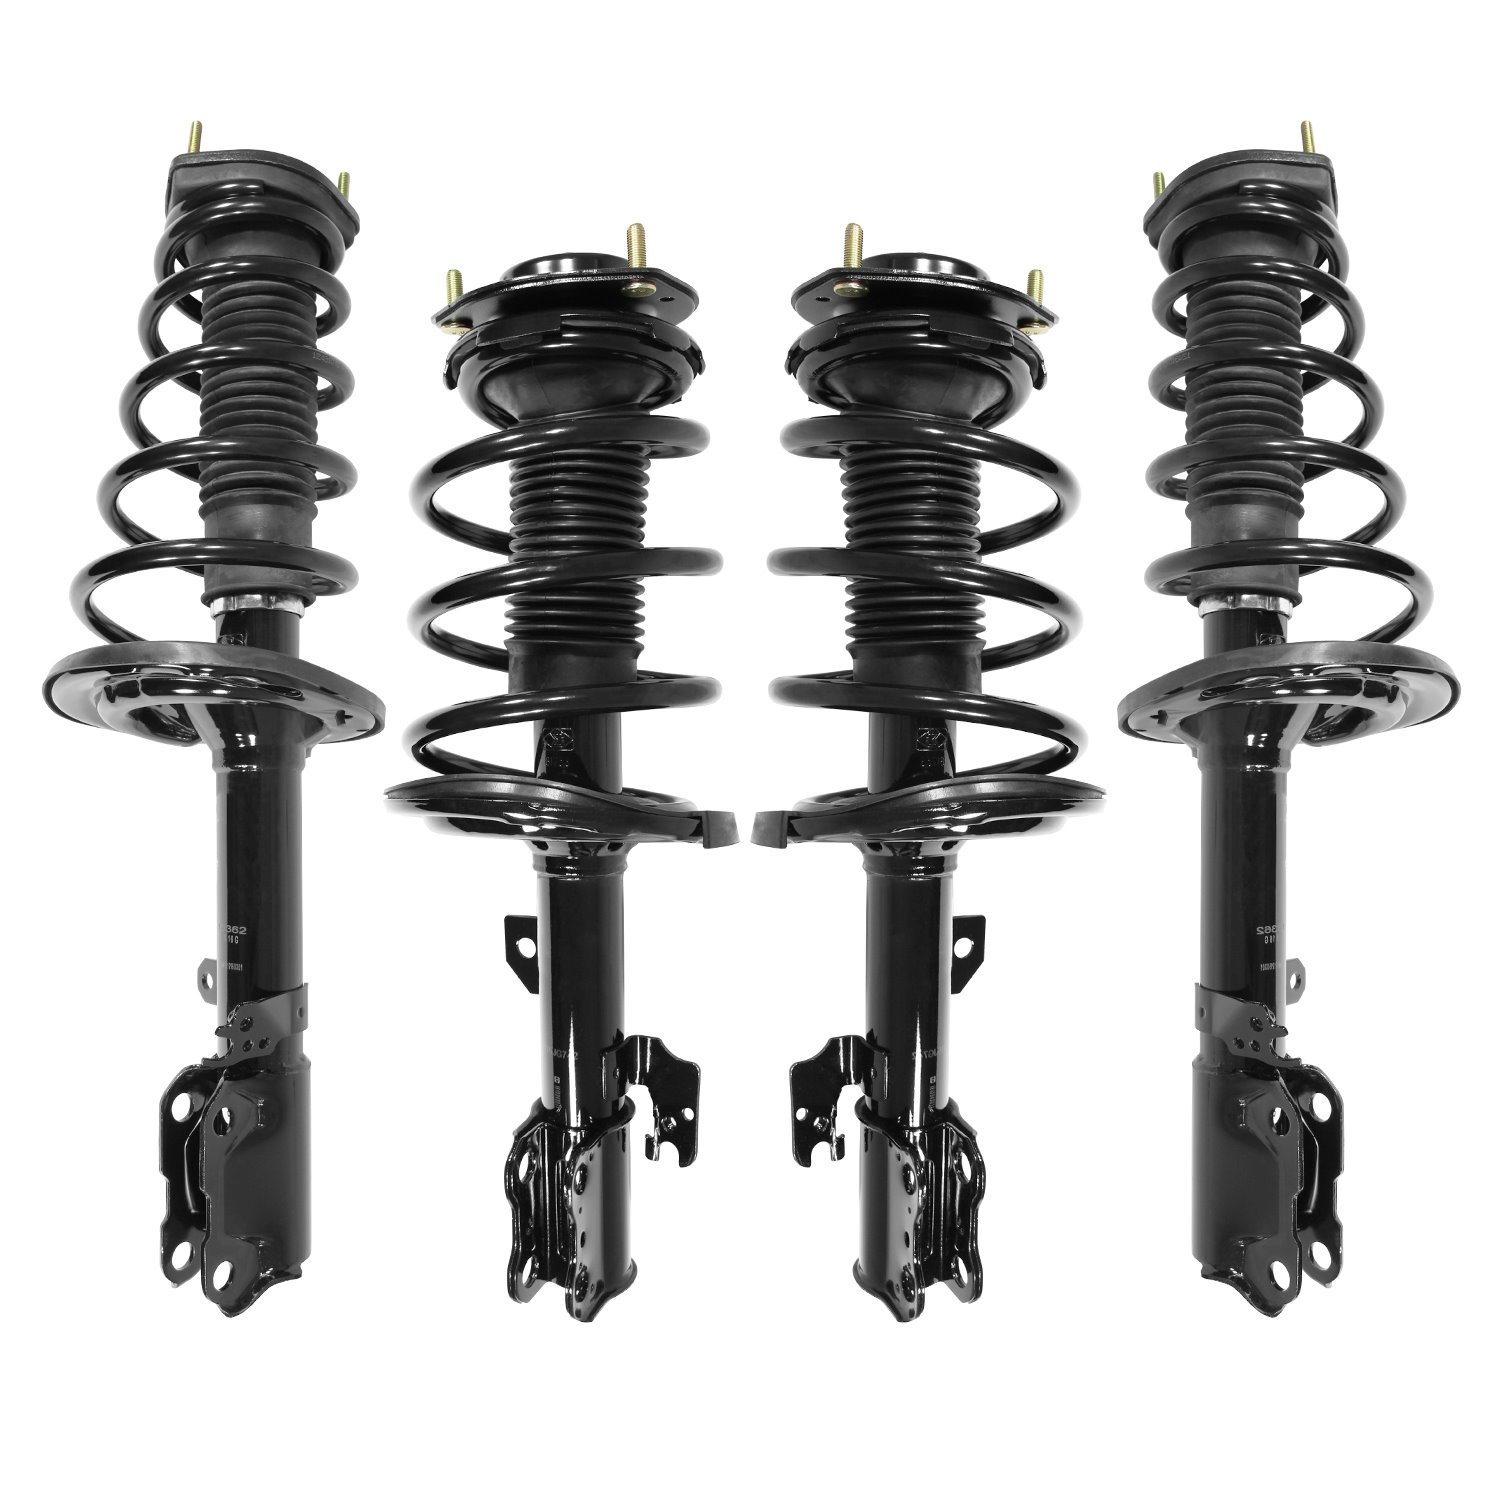 4-11741-15361-001 Front & Rear Suspension Strut & Coil Spring Assembly Kit Fits Select Lexus ES350, Toyota Avalon, Toyota Camry